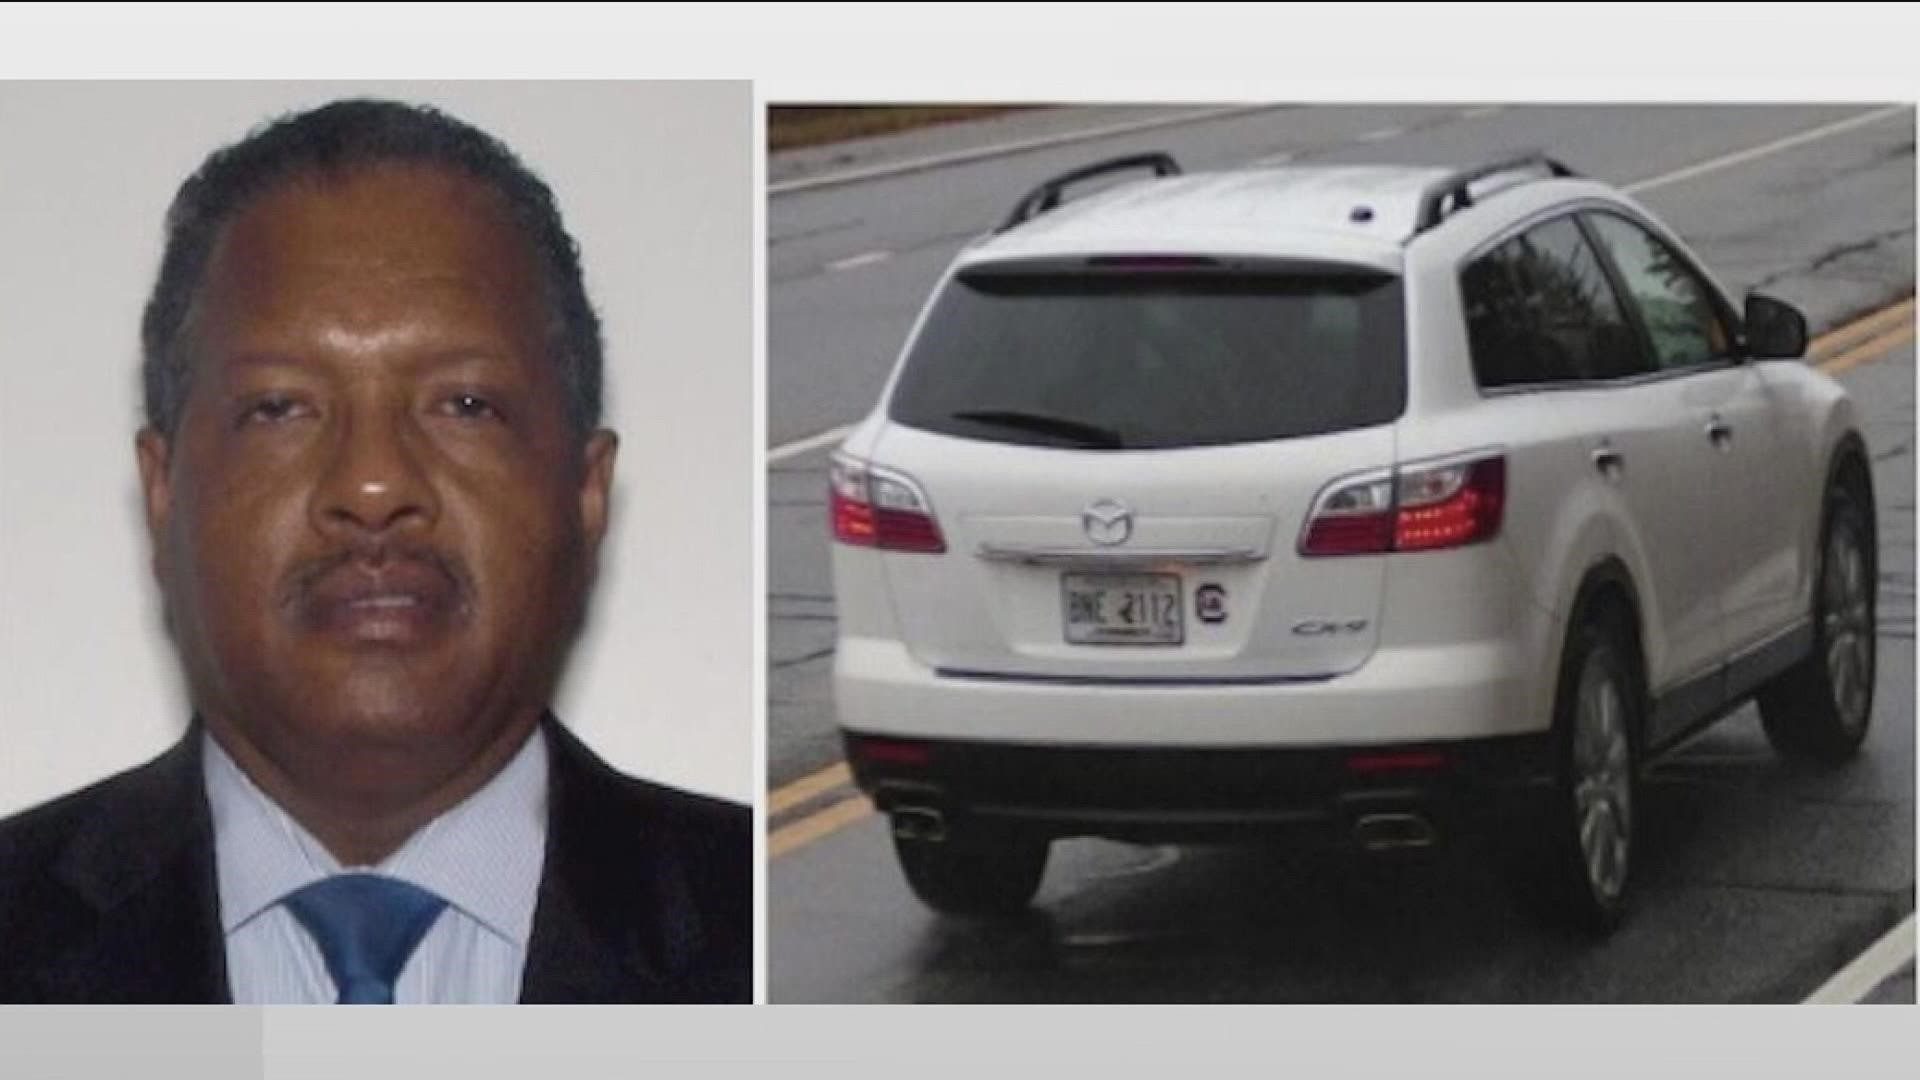 Victor Roberts had been reported missing in Cobb County last week. He was a deputy commissioner in the Georgia Department of Juvenile Justice.